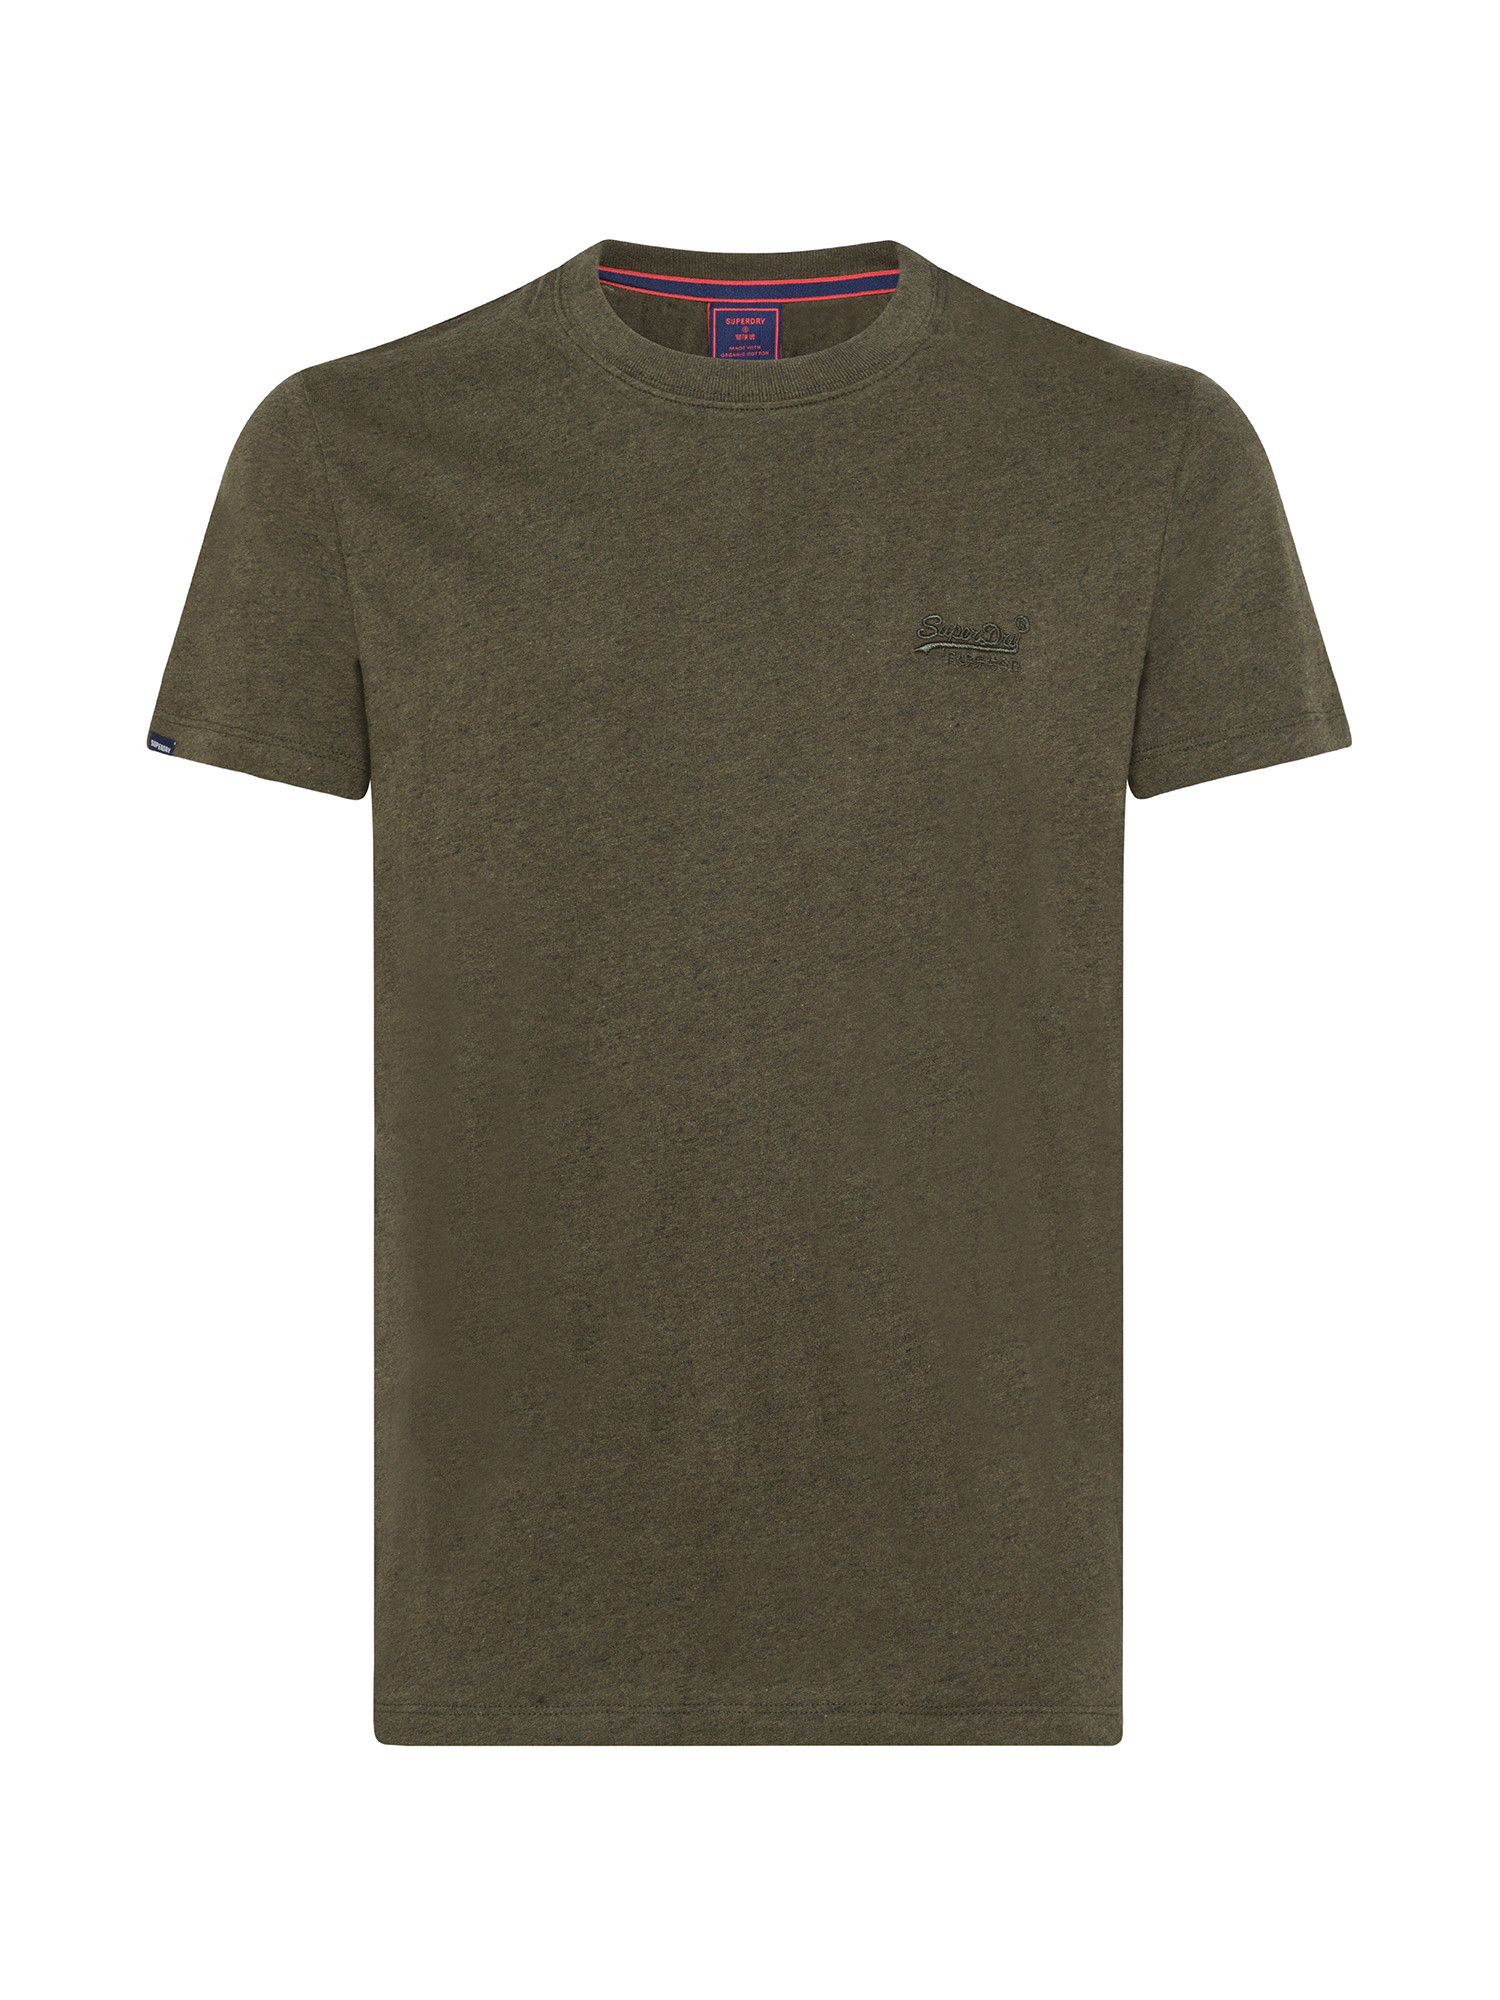 Superdry - T-shirt with embroidered logo, Olive Green, large image number 0